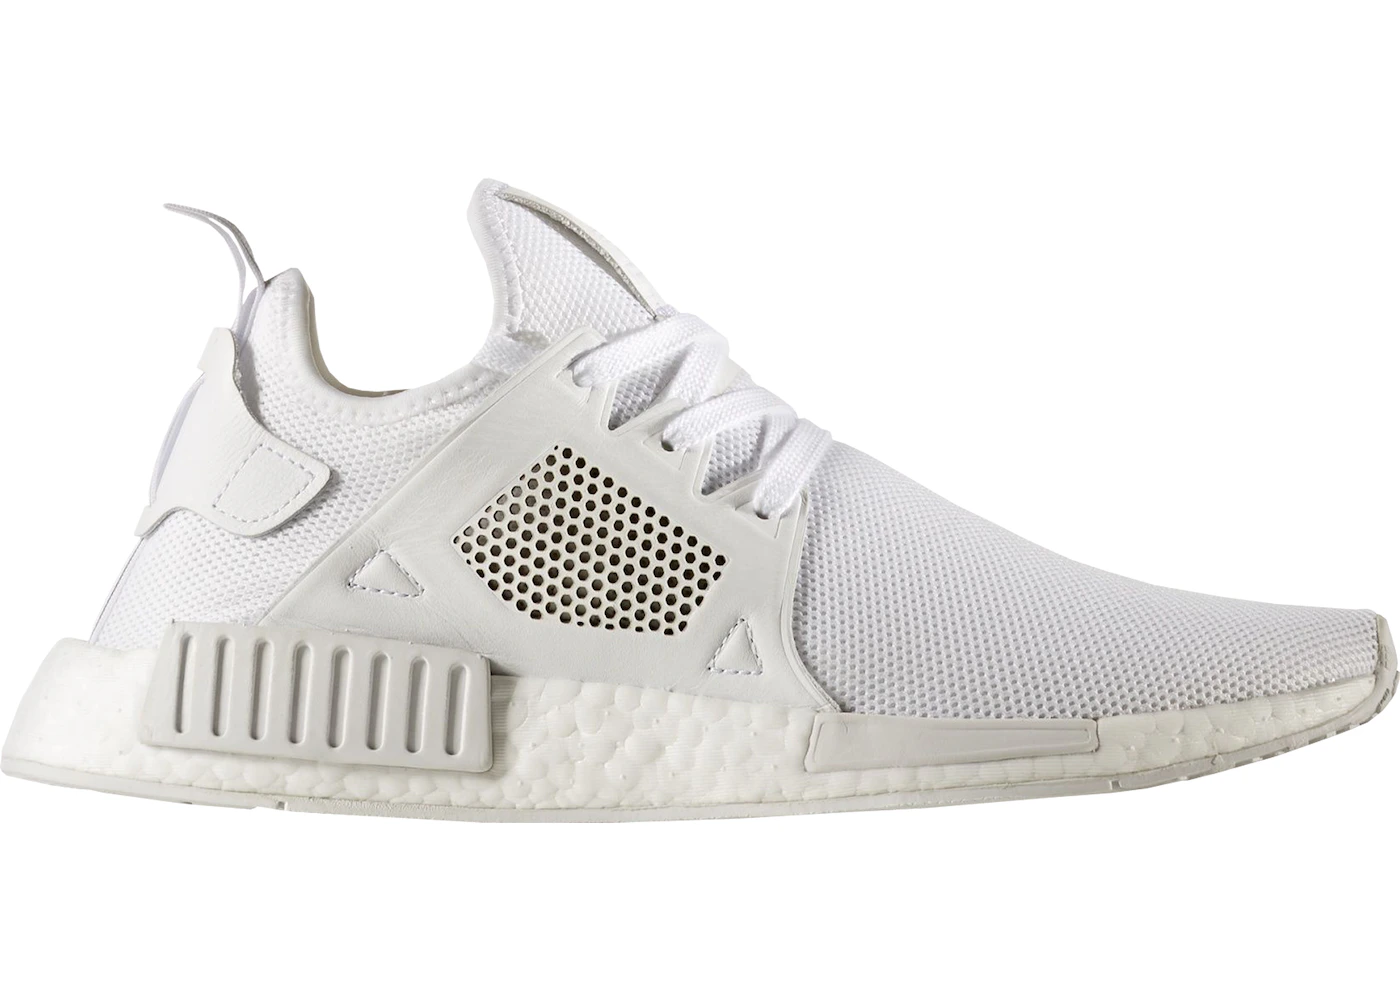 adidas NMD XR1 White (2017) - BY9922 US